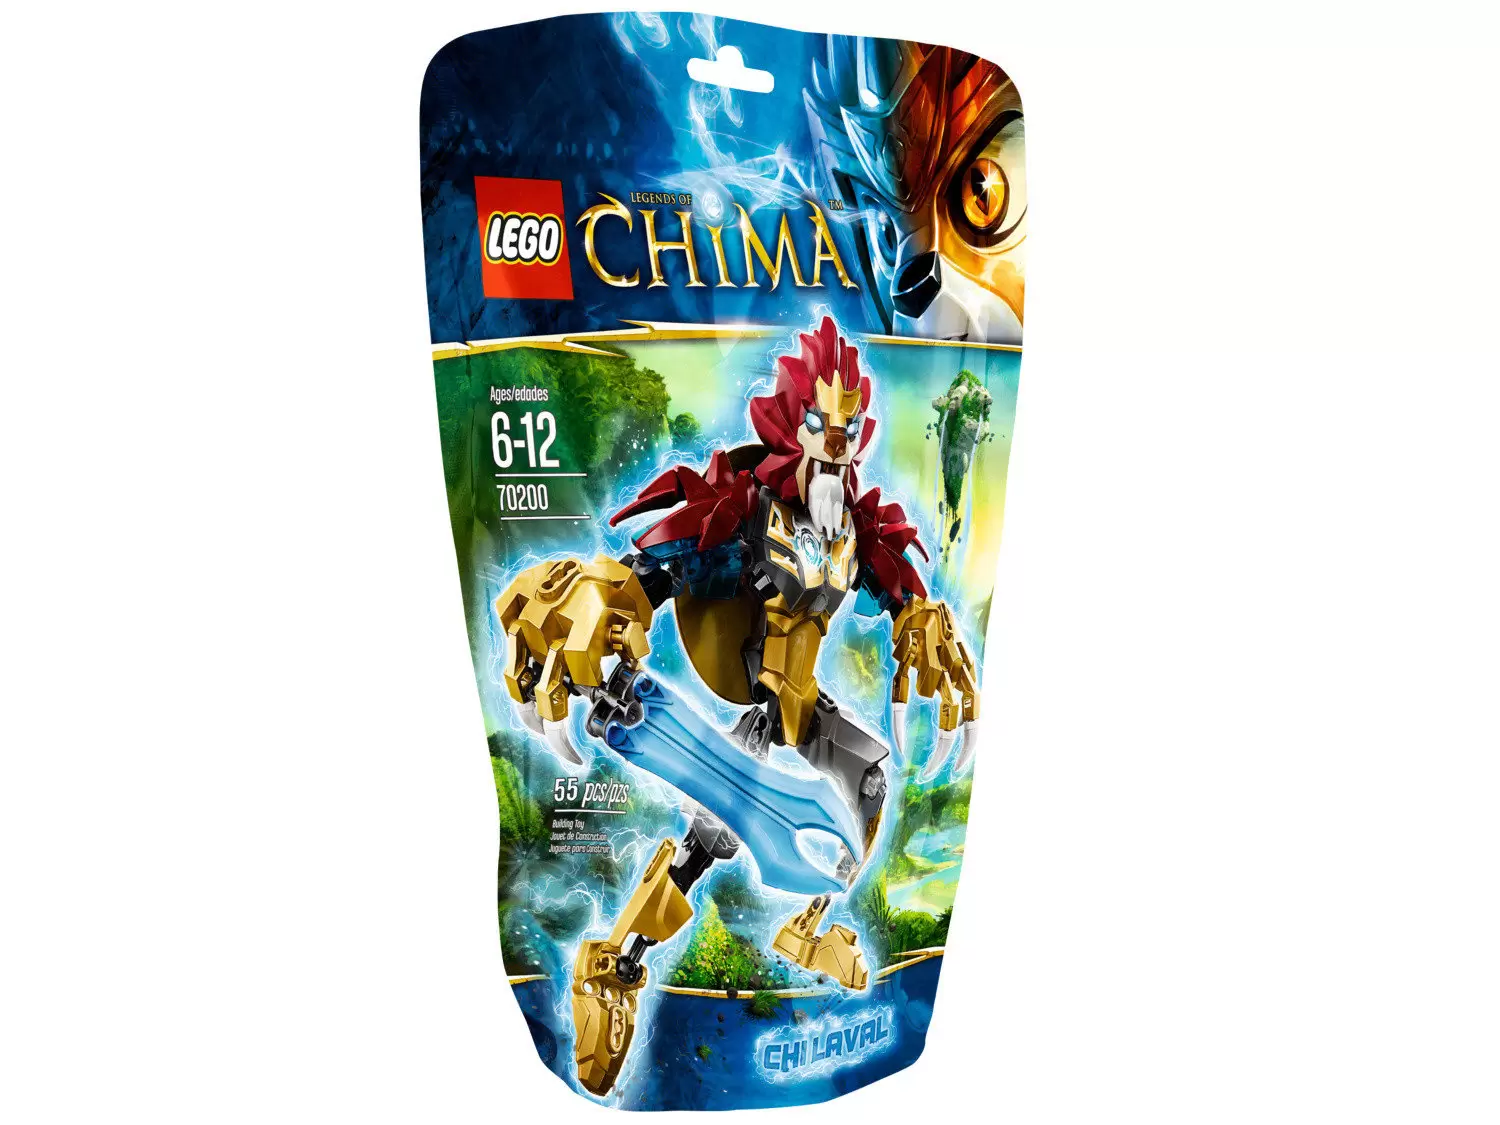 LEGO Legends of Chima - Chi Laval